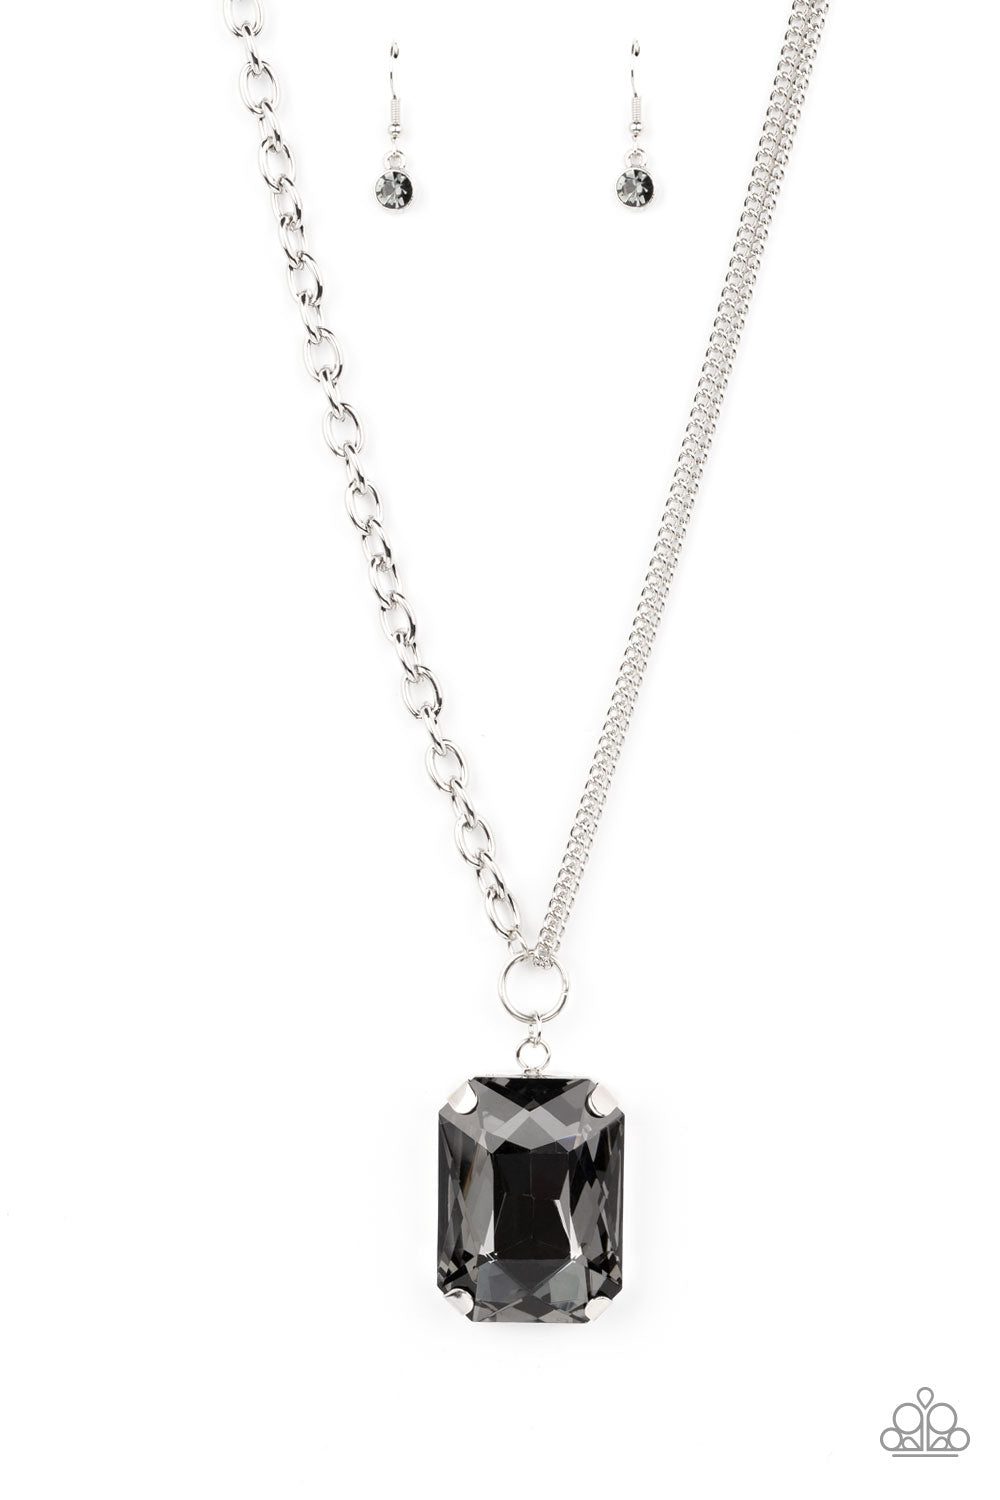 Instant Intimidation Silver Necklace - Paparazzi Accessories  Two regular silver chains combine with a thicker silver chain to hold an oversized faceted emerald-cut black gem. The oversized gem is held in place by a flat pronged setting, instantly highlighting the high-class glitz of the pendant. Features an adjustable clasp closure.  Sold as one individual necklace. Includes one pair of matching earrings.  P2RE-SVXX-425XX